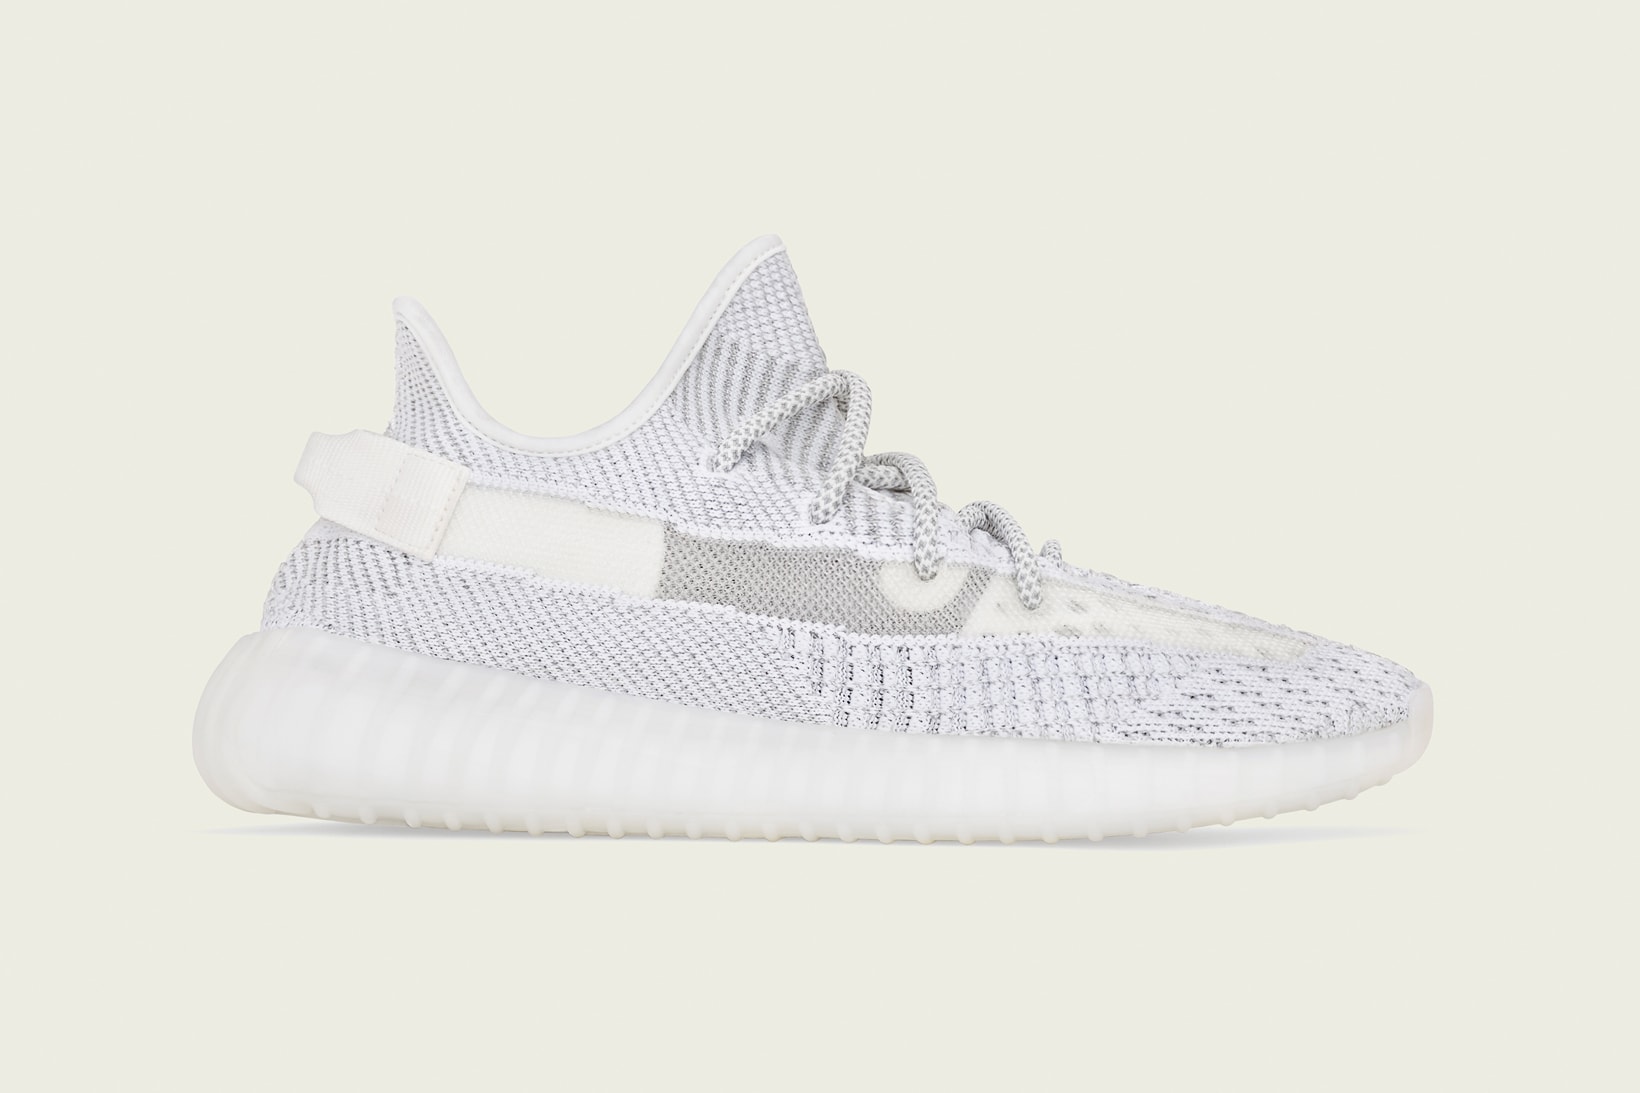 adidas YEEZY BOOST 350 V2 Static Non Reflective